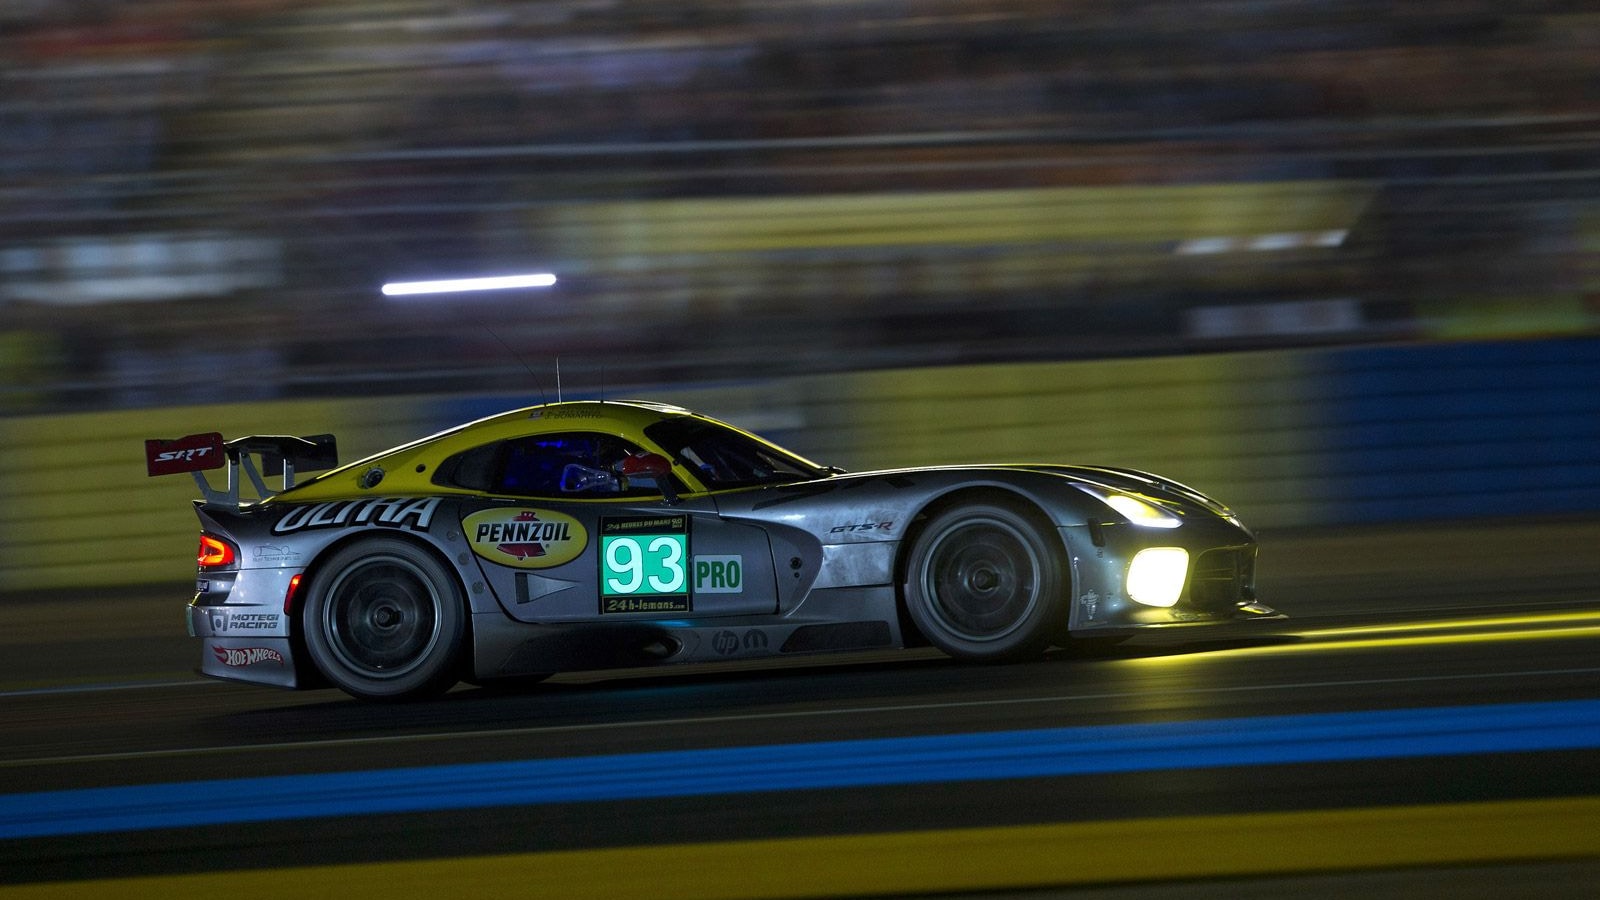 SRT Viper GTS-R at the 2013 24 Hour of Le Mans